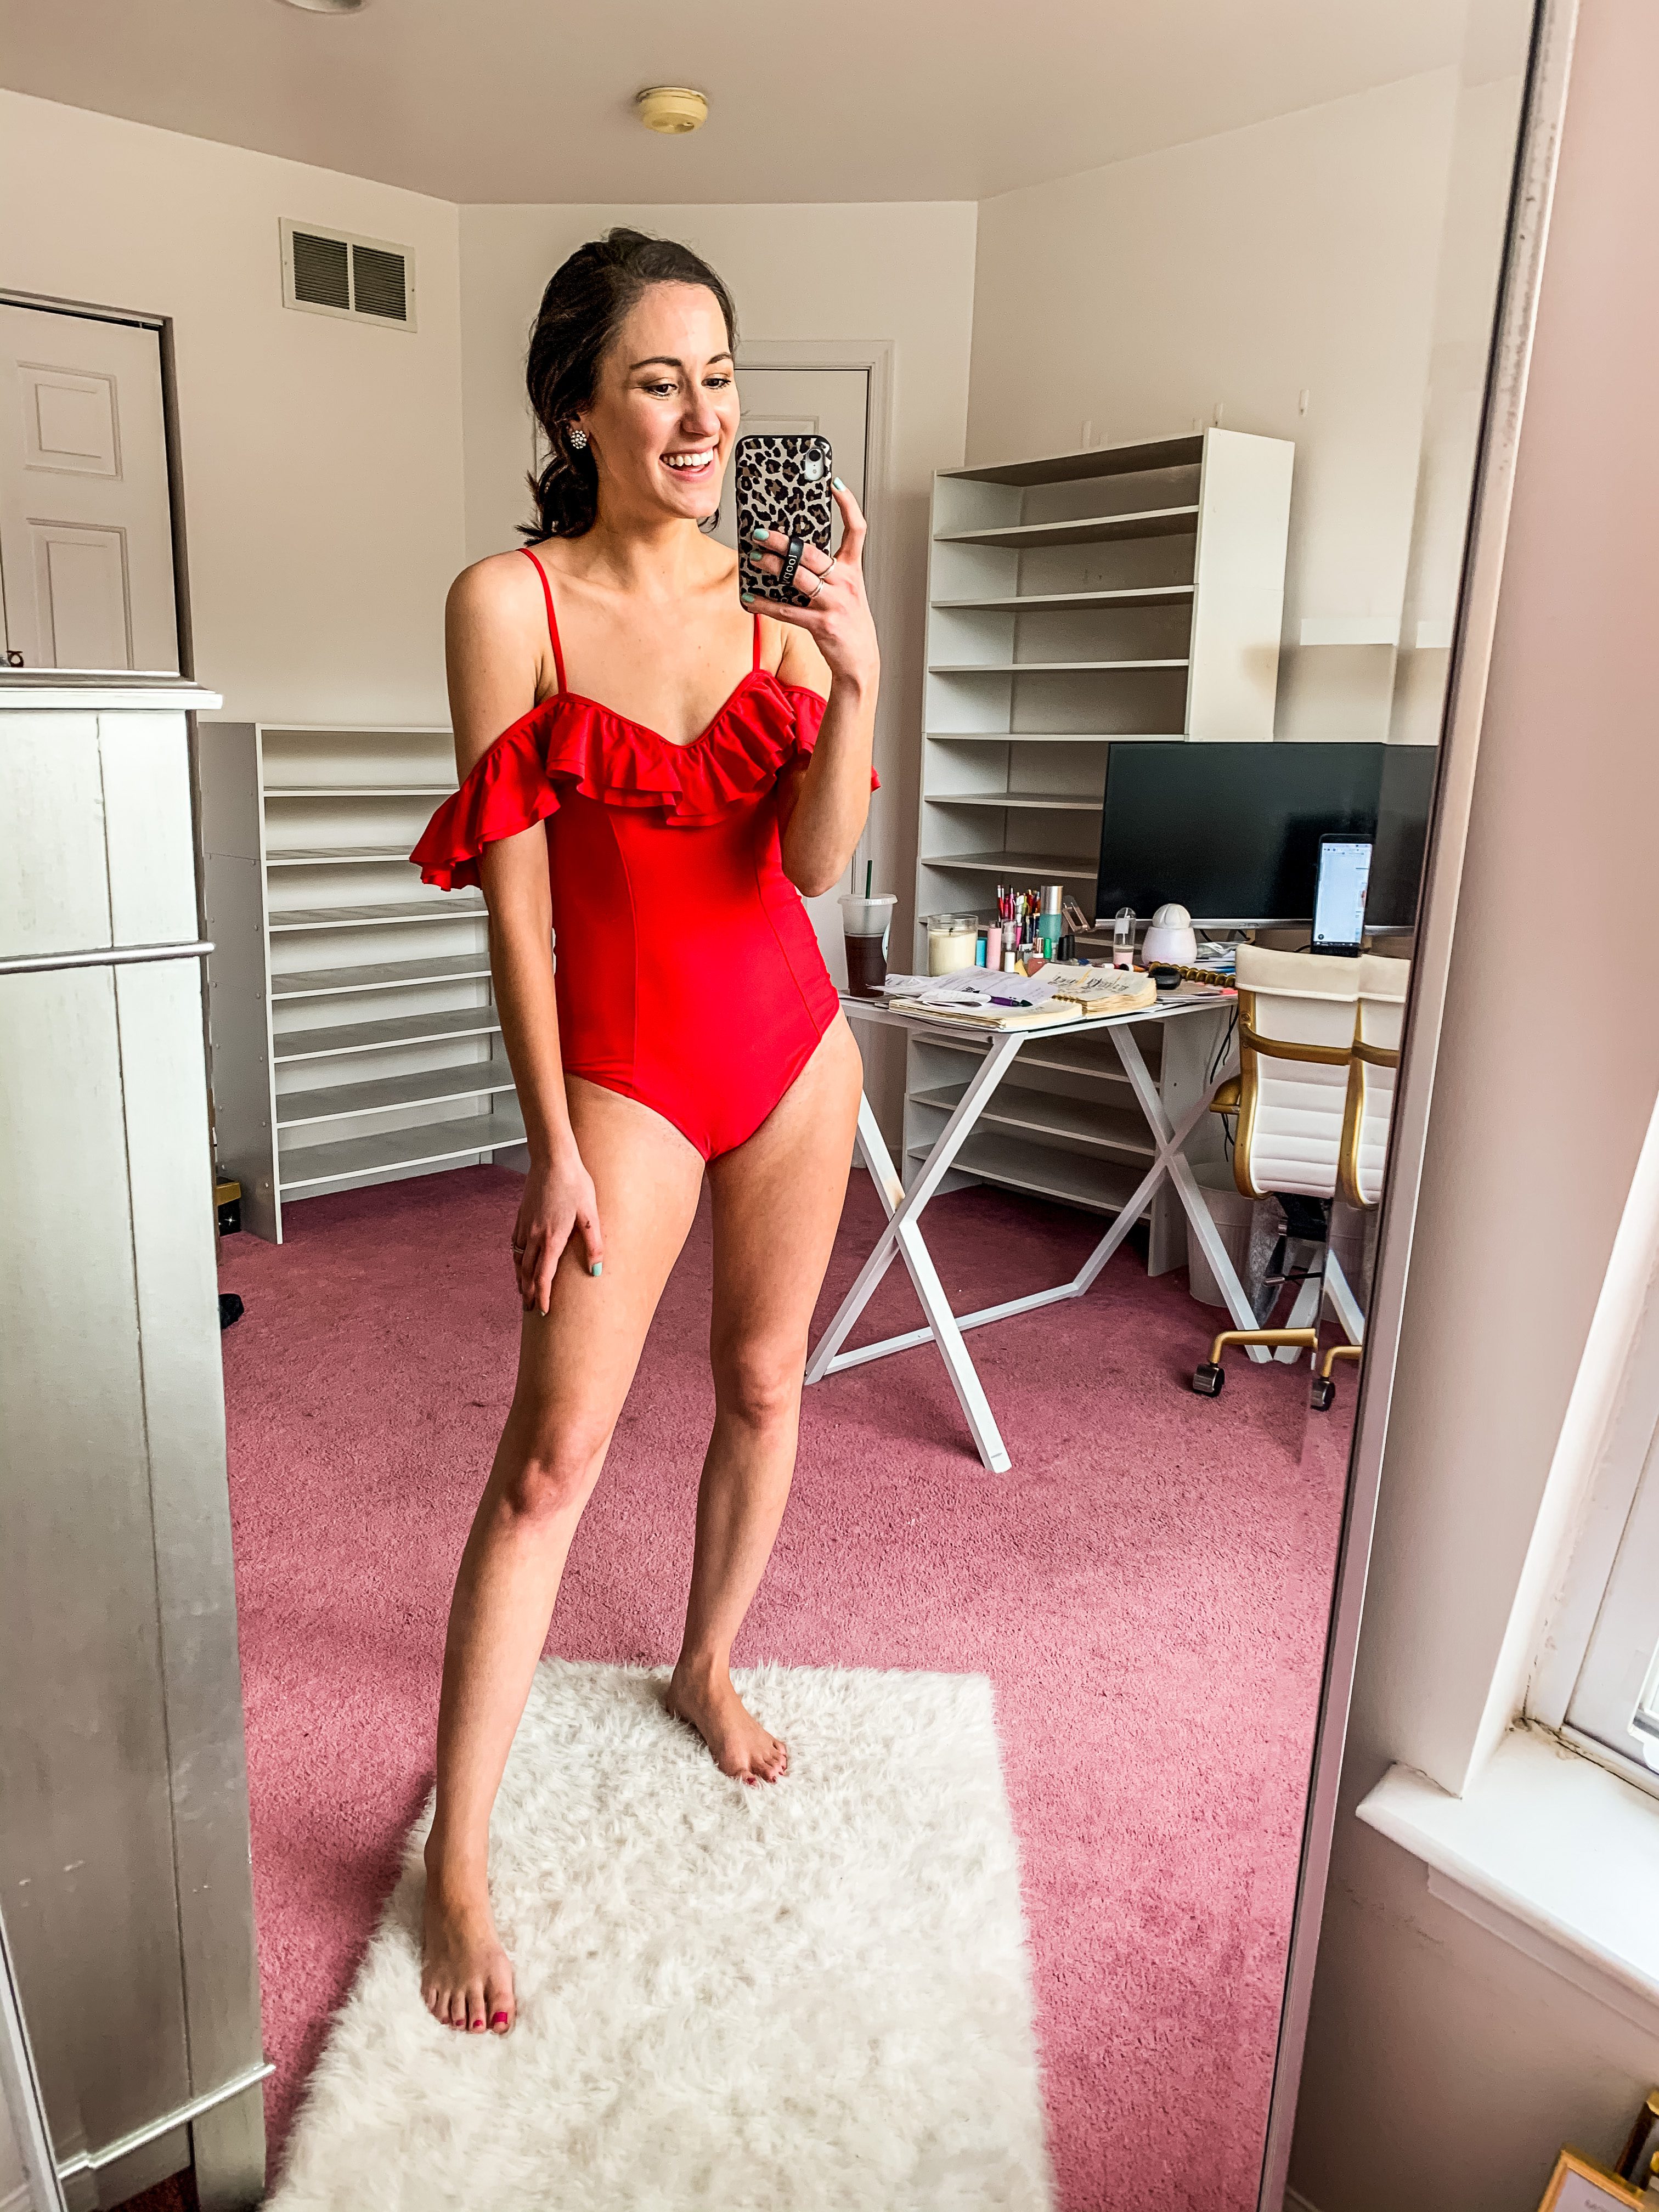 2020 SWIMSUIT HAUL: 11 Affordable, Comfortable, More Modest Swimsuits - on Coming Up Roses